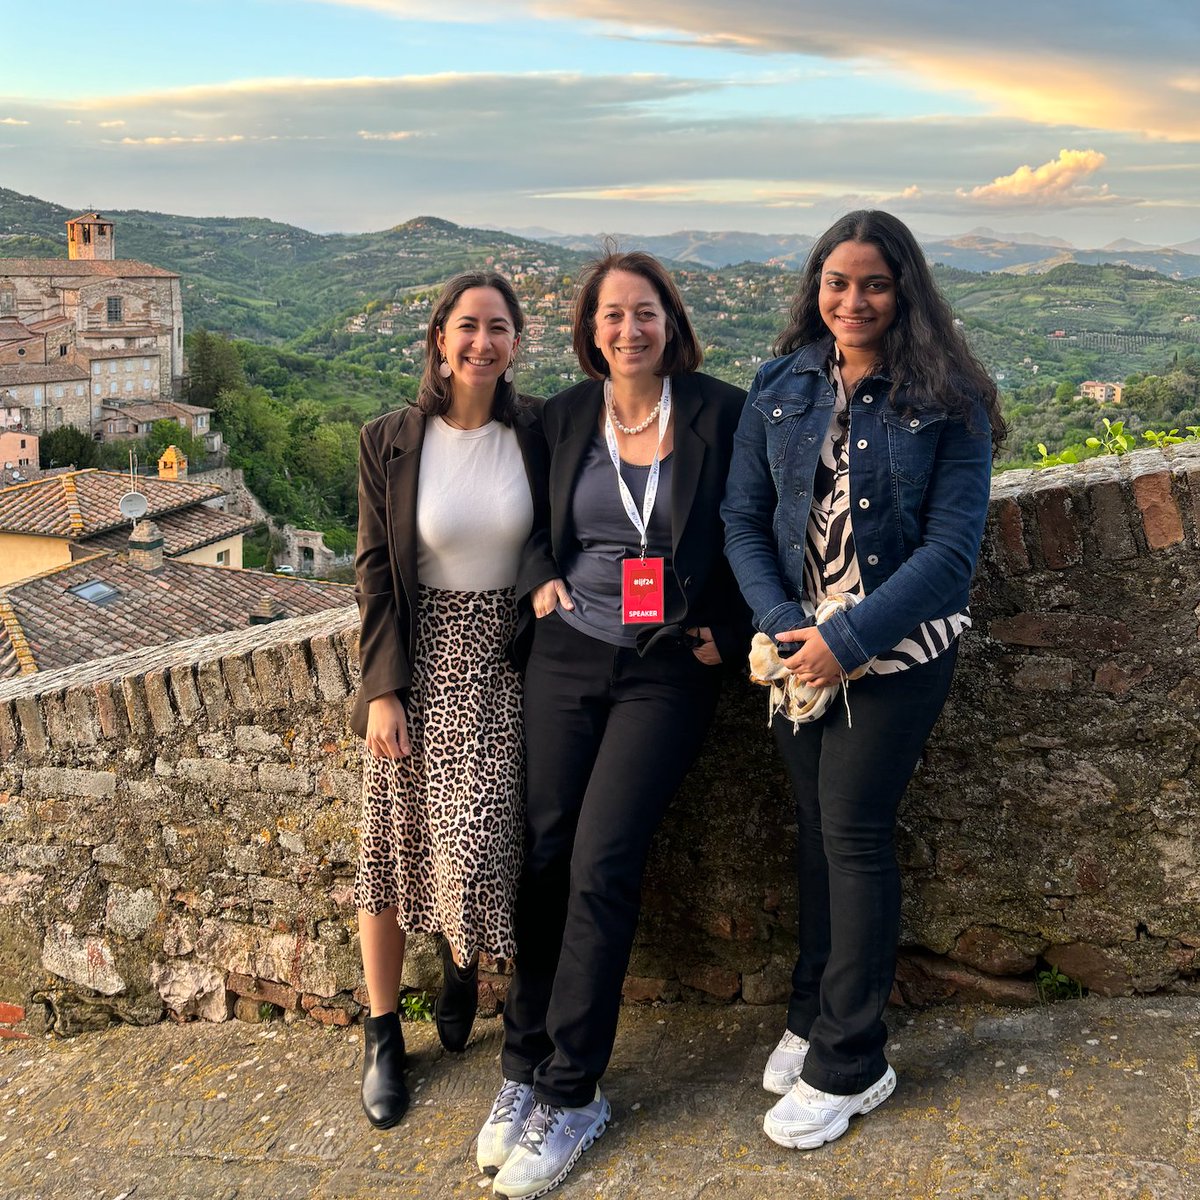 Andrea Vega Yudico MIA '25 and Raghavi Sharma MPA '24 recently joined Professor @AnyaSIPA on a trip to Perugia, Italy for the annual International @journalismfest. They attended discussions of a variety of topics including the relationship between journalism and AI technology.